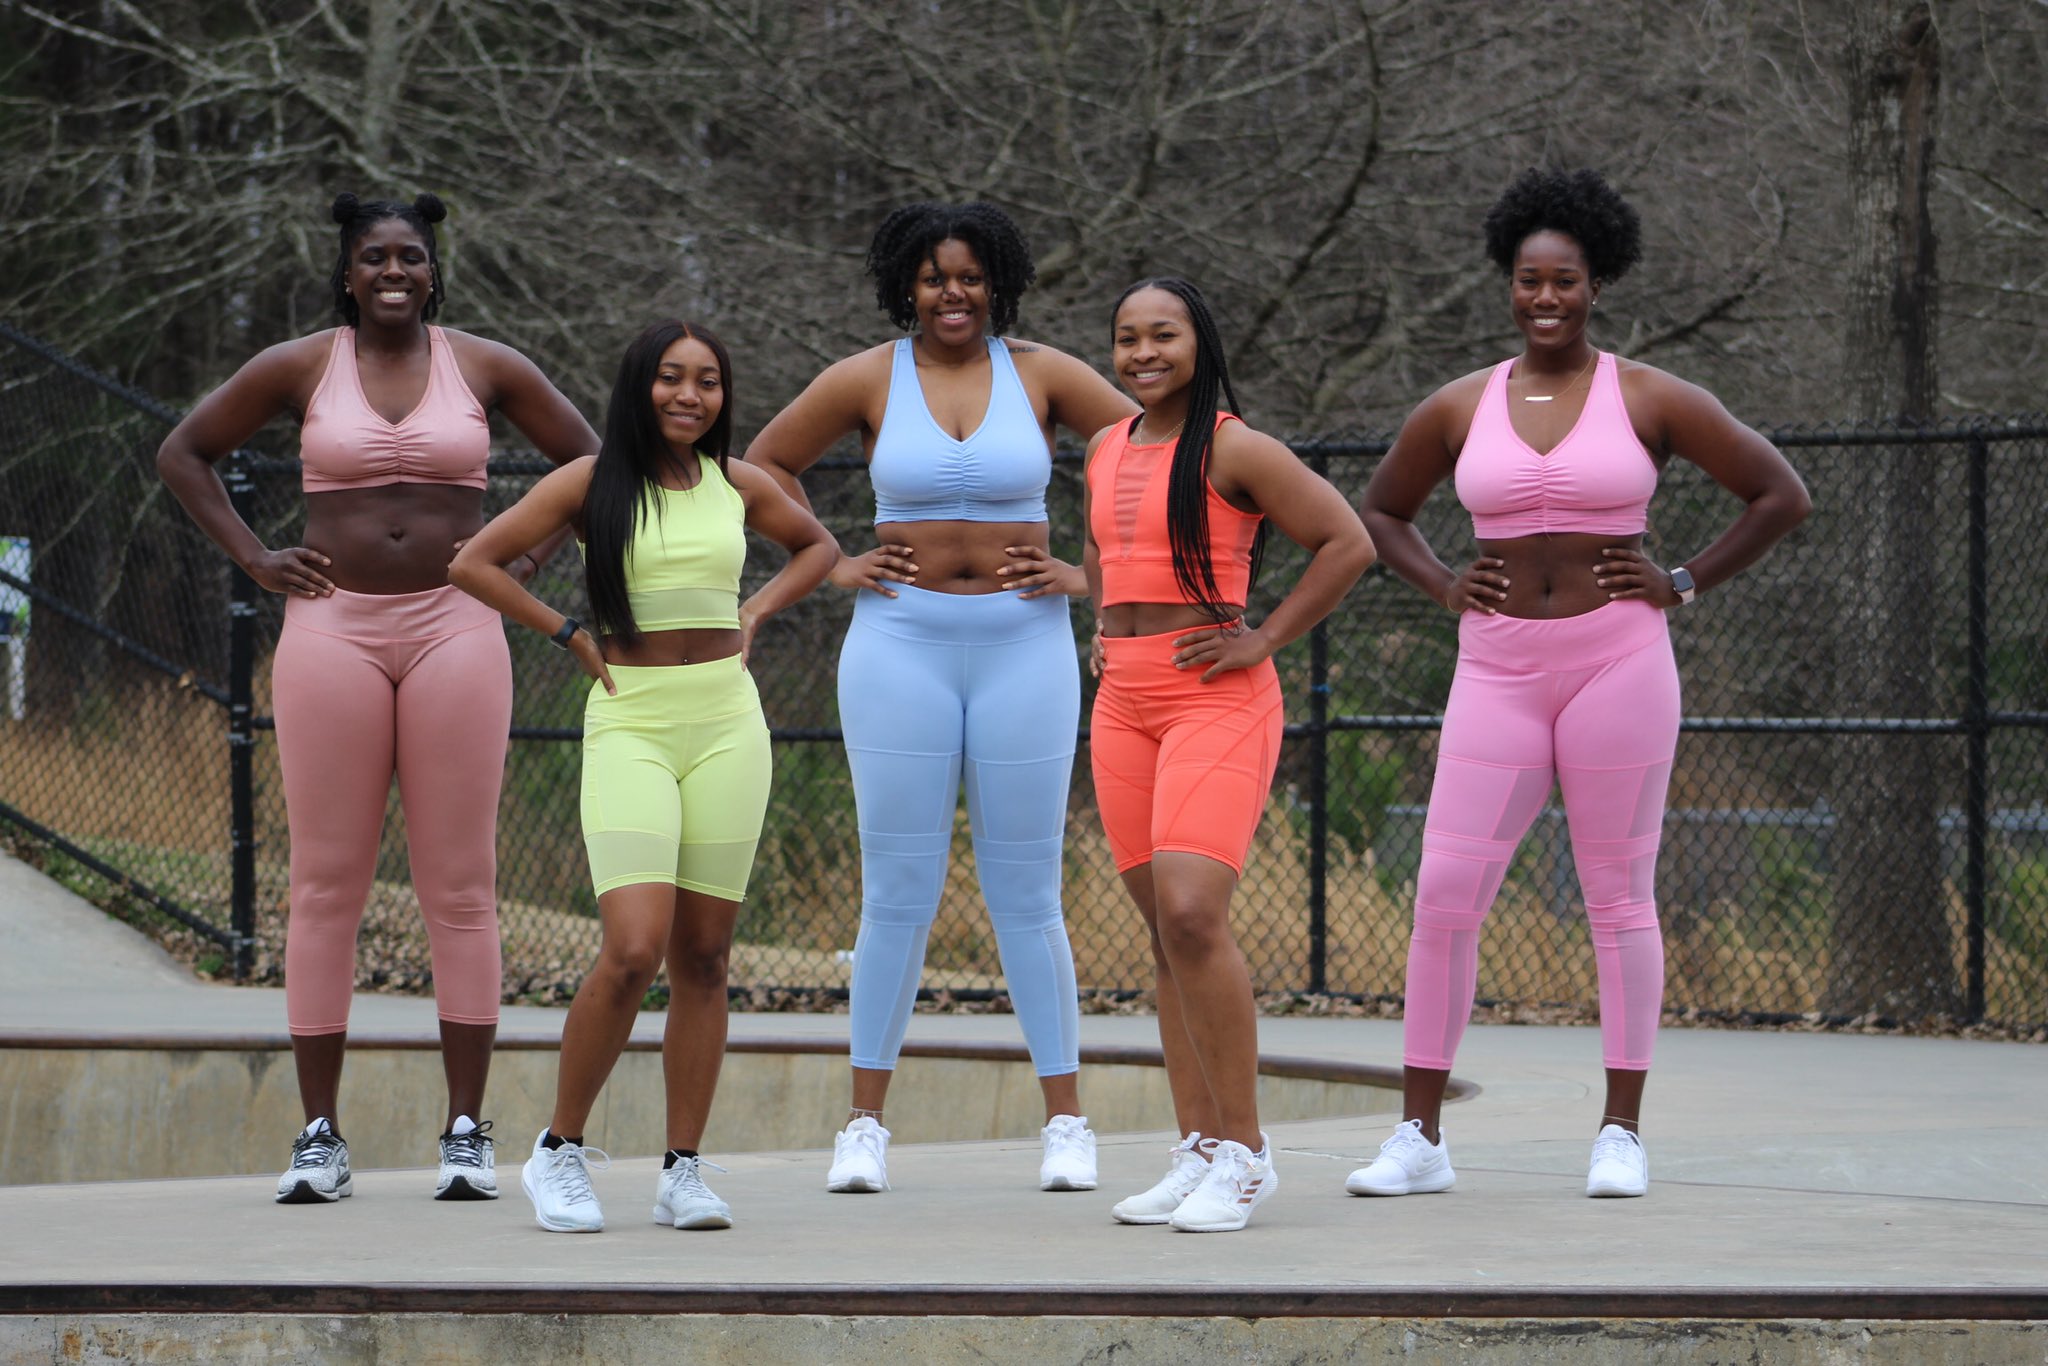 Thick Fit on X: Please don't get caught up in our name. Thick Fit is for  everyBODY! Our goal is to be an inclusive body positive brand that  celebrates people no matter